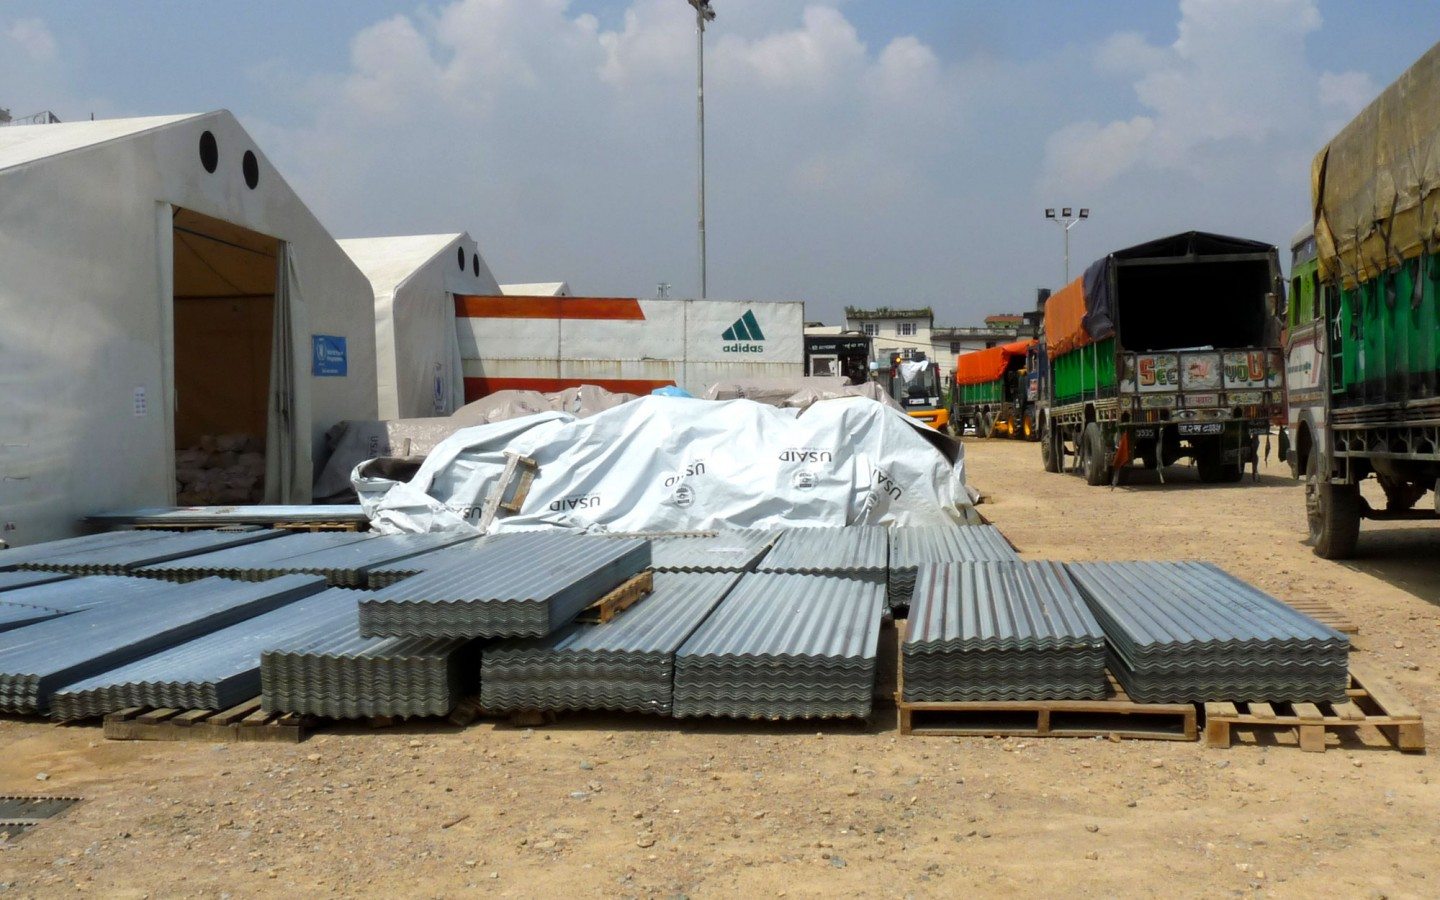 Zinc roofing materials for homes and shelters awaits distribution at the WFP base in Kathmandu. 